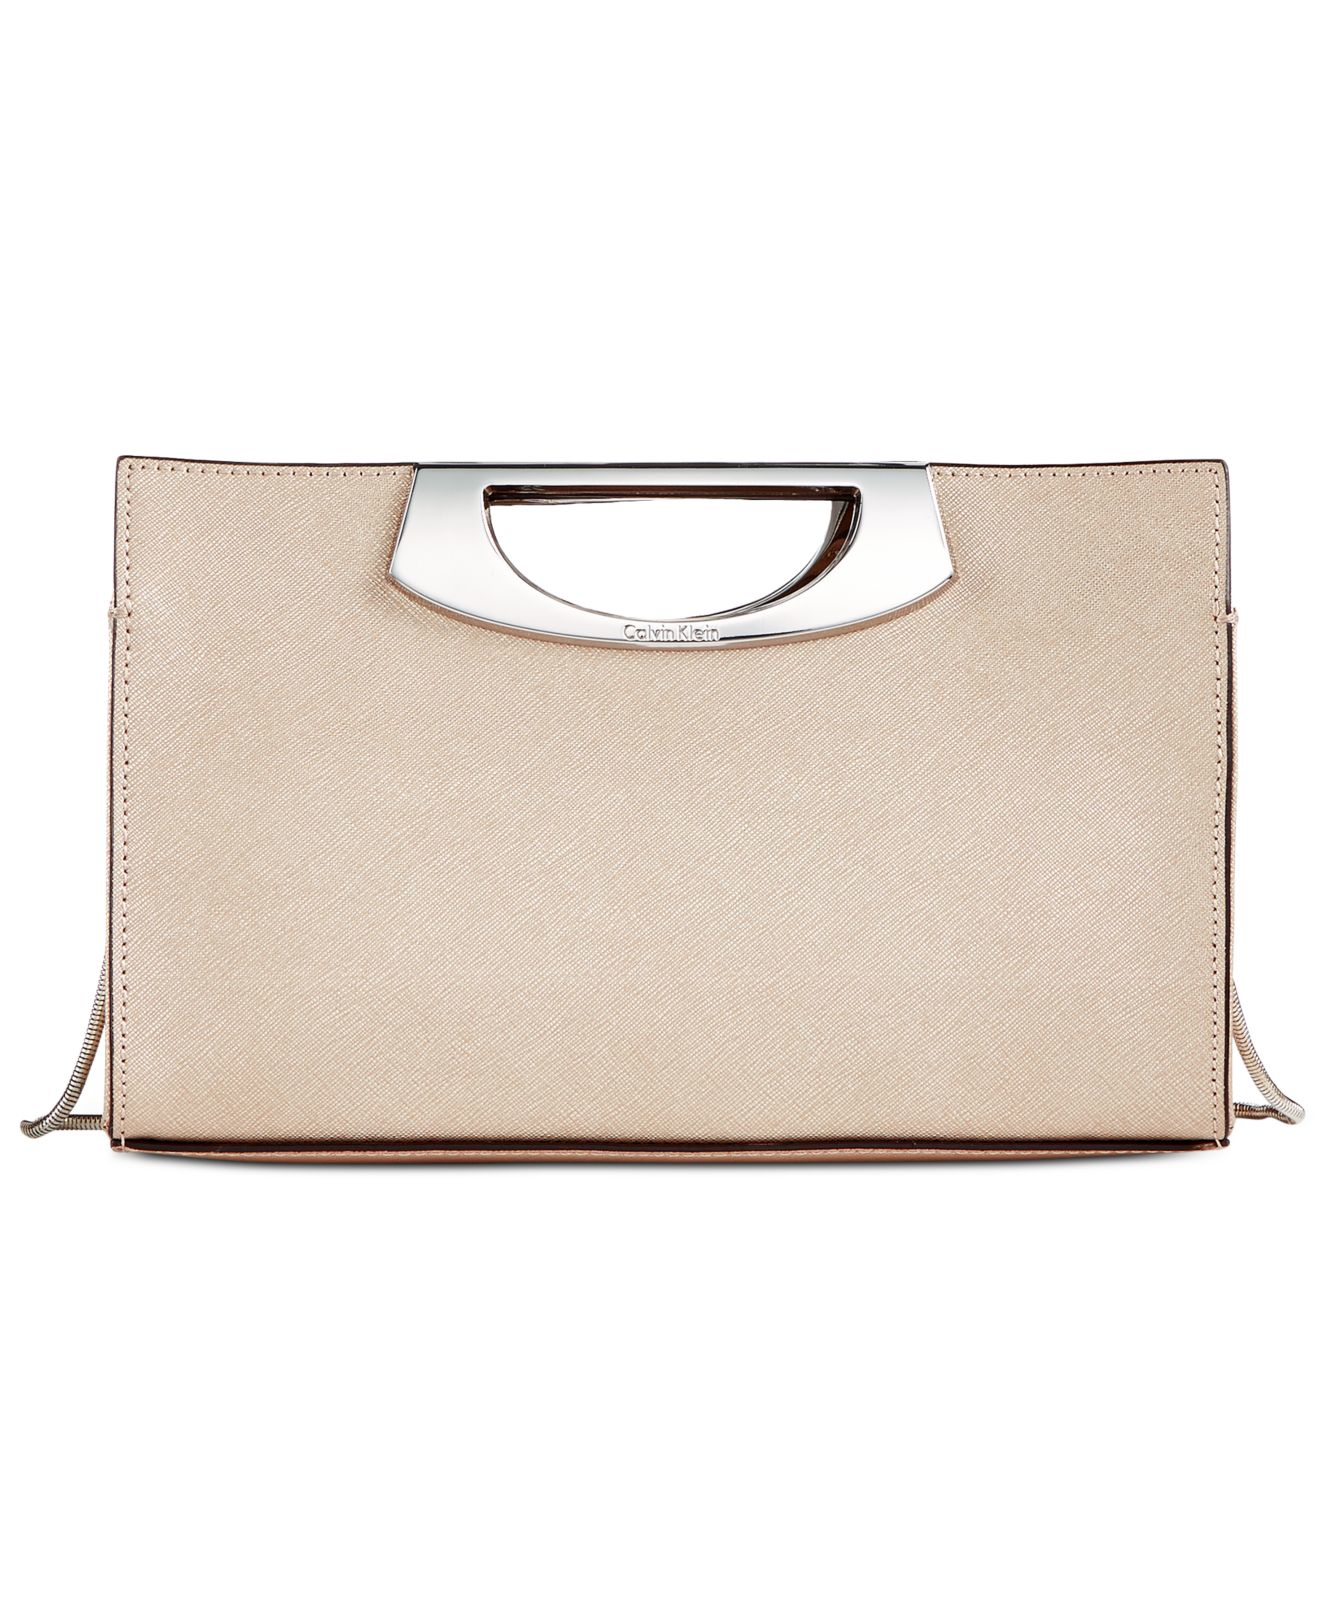 Lyst - Calvin Klein Saffiano Leather Convertible Clutch With Metal ...